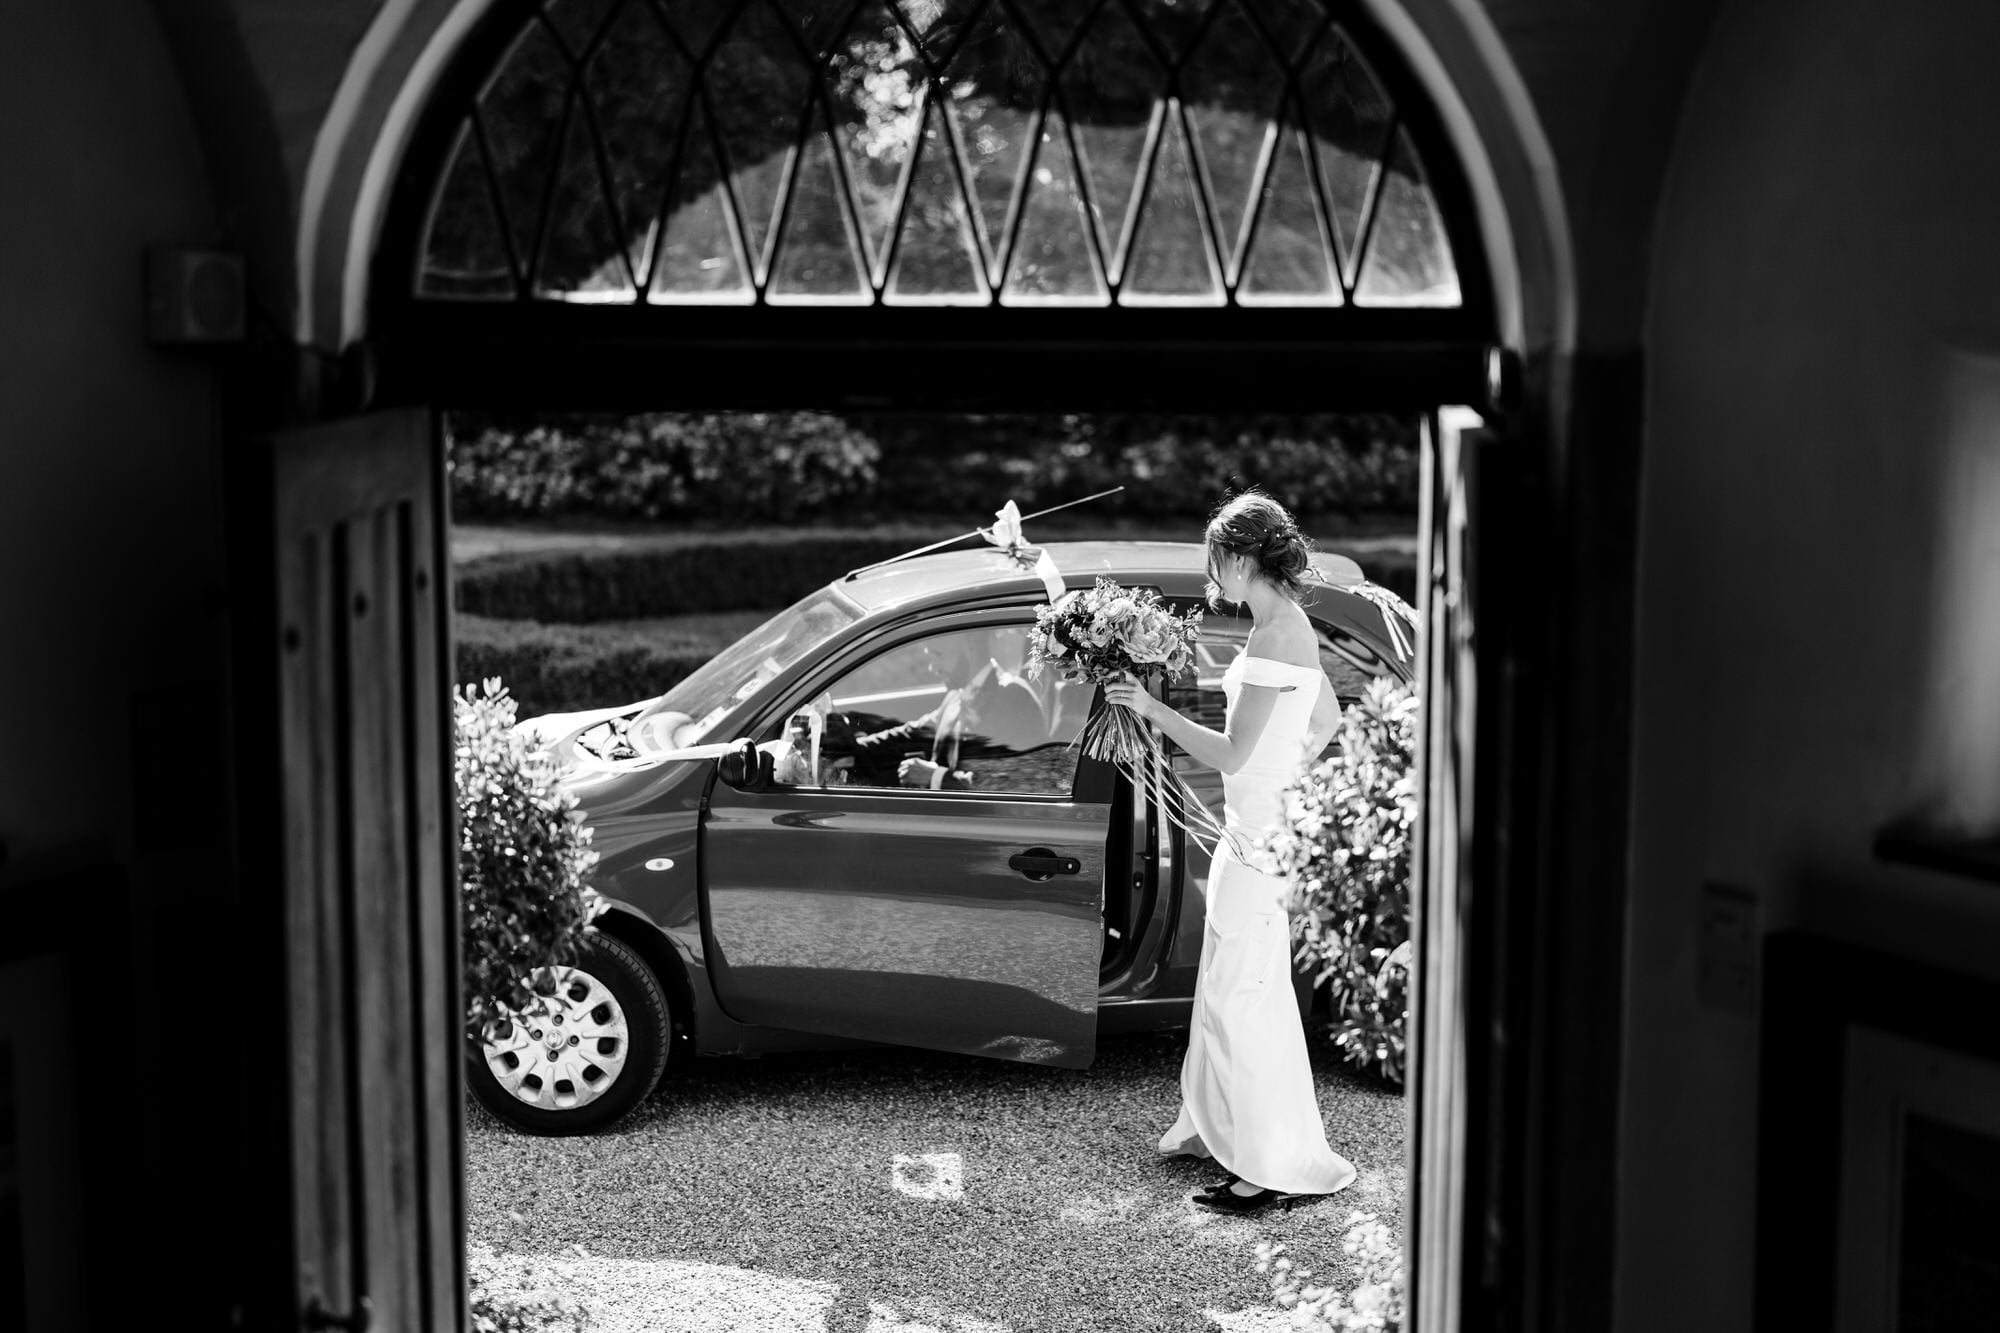 Voewood Bride entering car, holding bouquet, black and white photo.